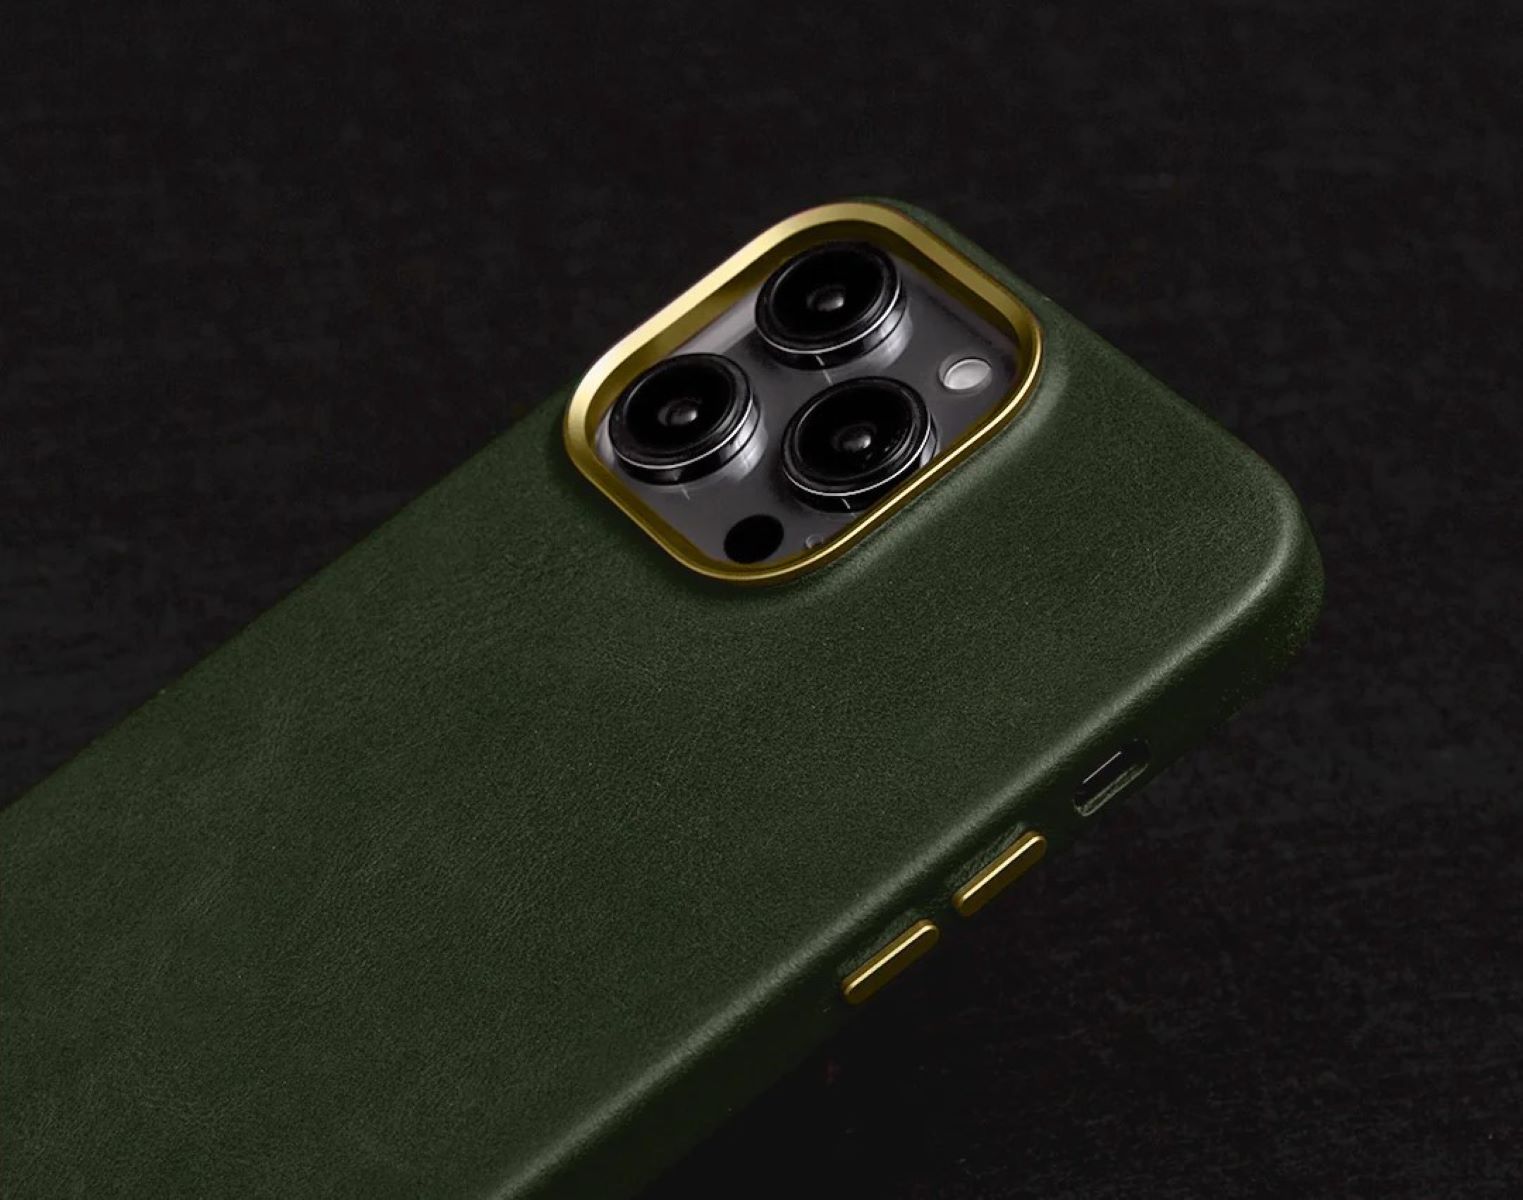 IPhone 11 Pro Max Cases: Exploring Options For Maximum Protection